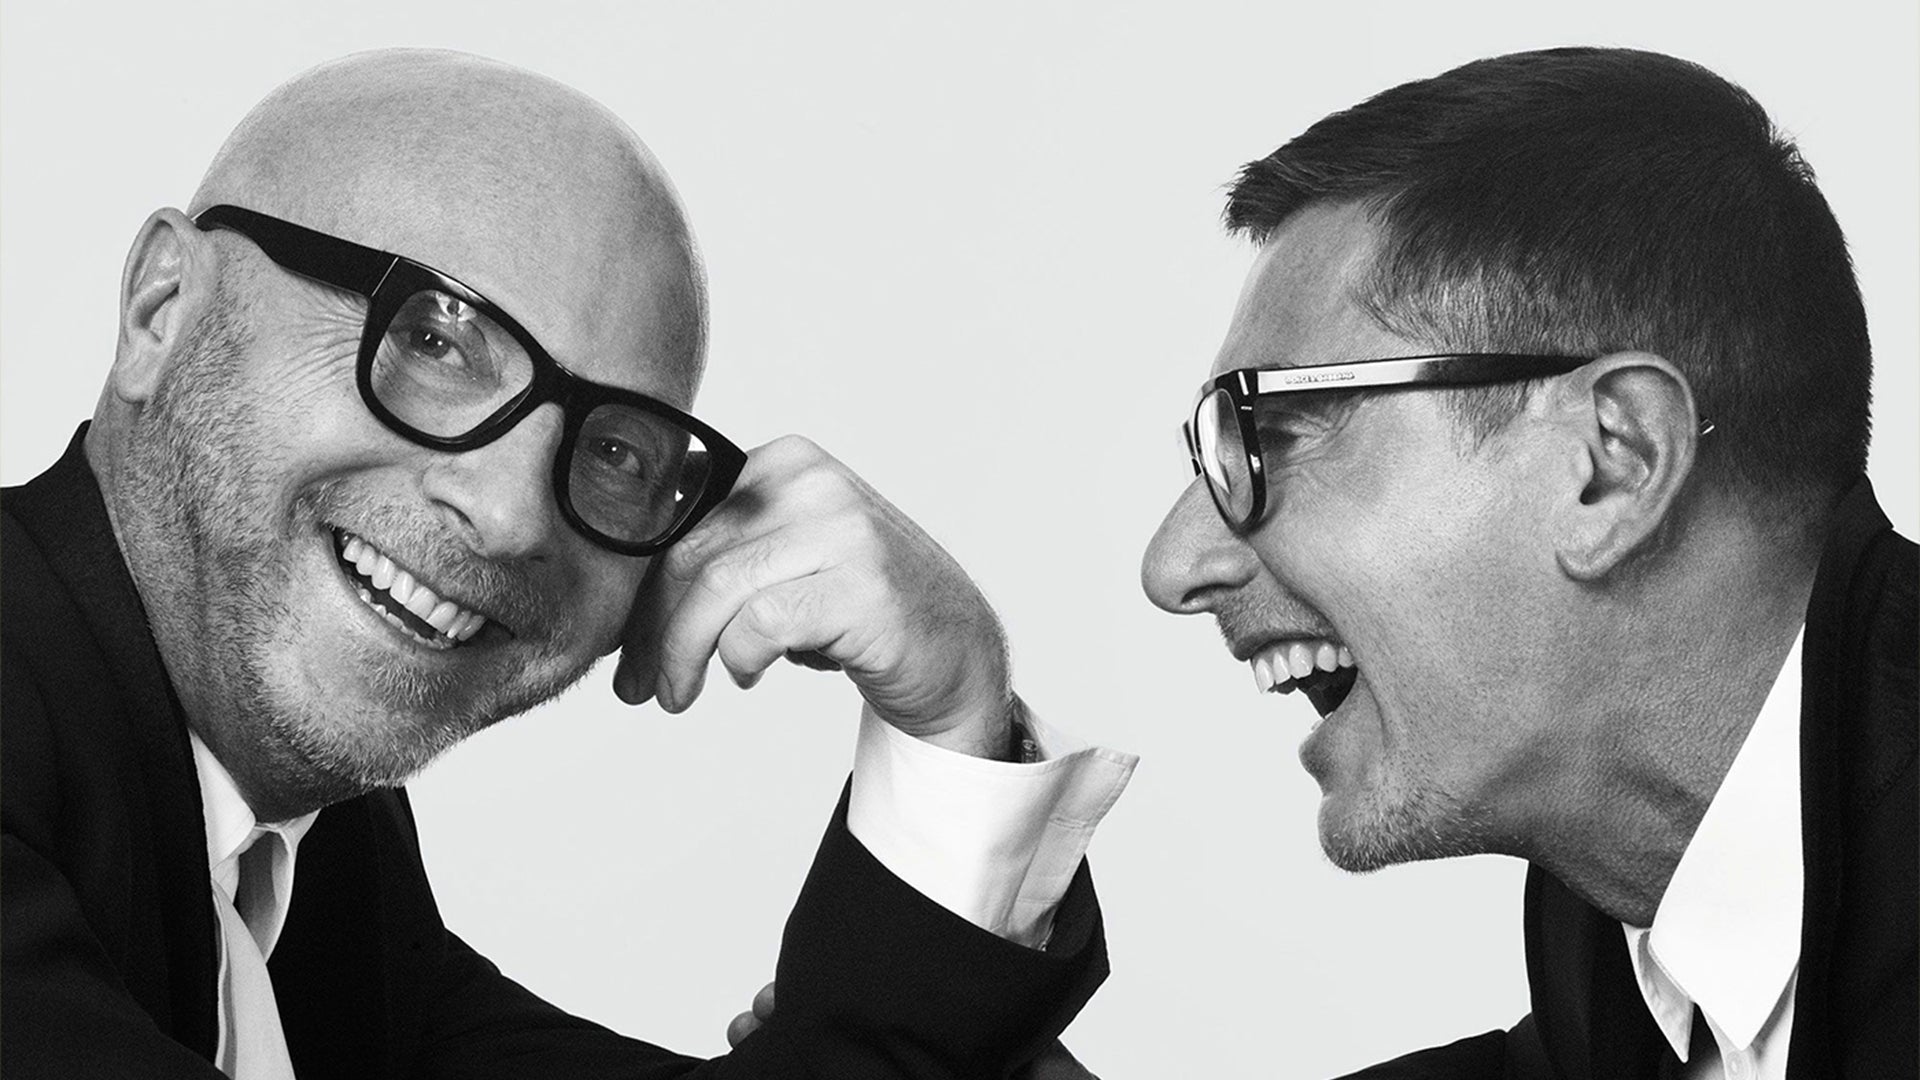 Domenico Dolce & Stefano Gabbana: The Story Behind The Fashion Label